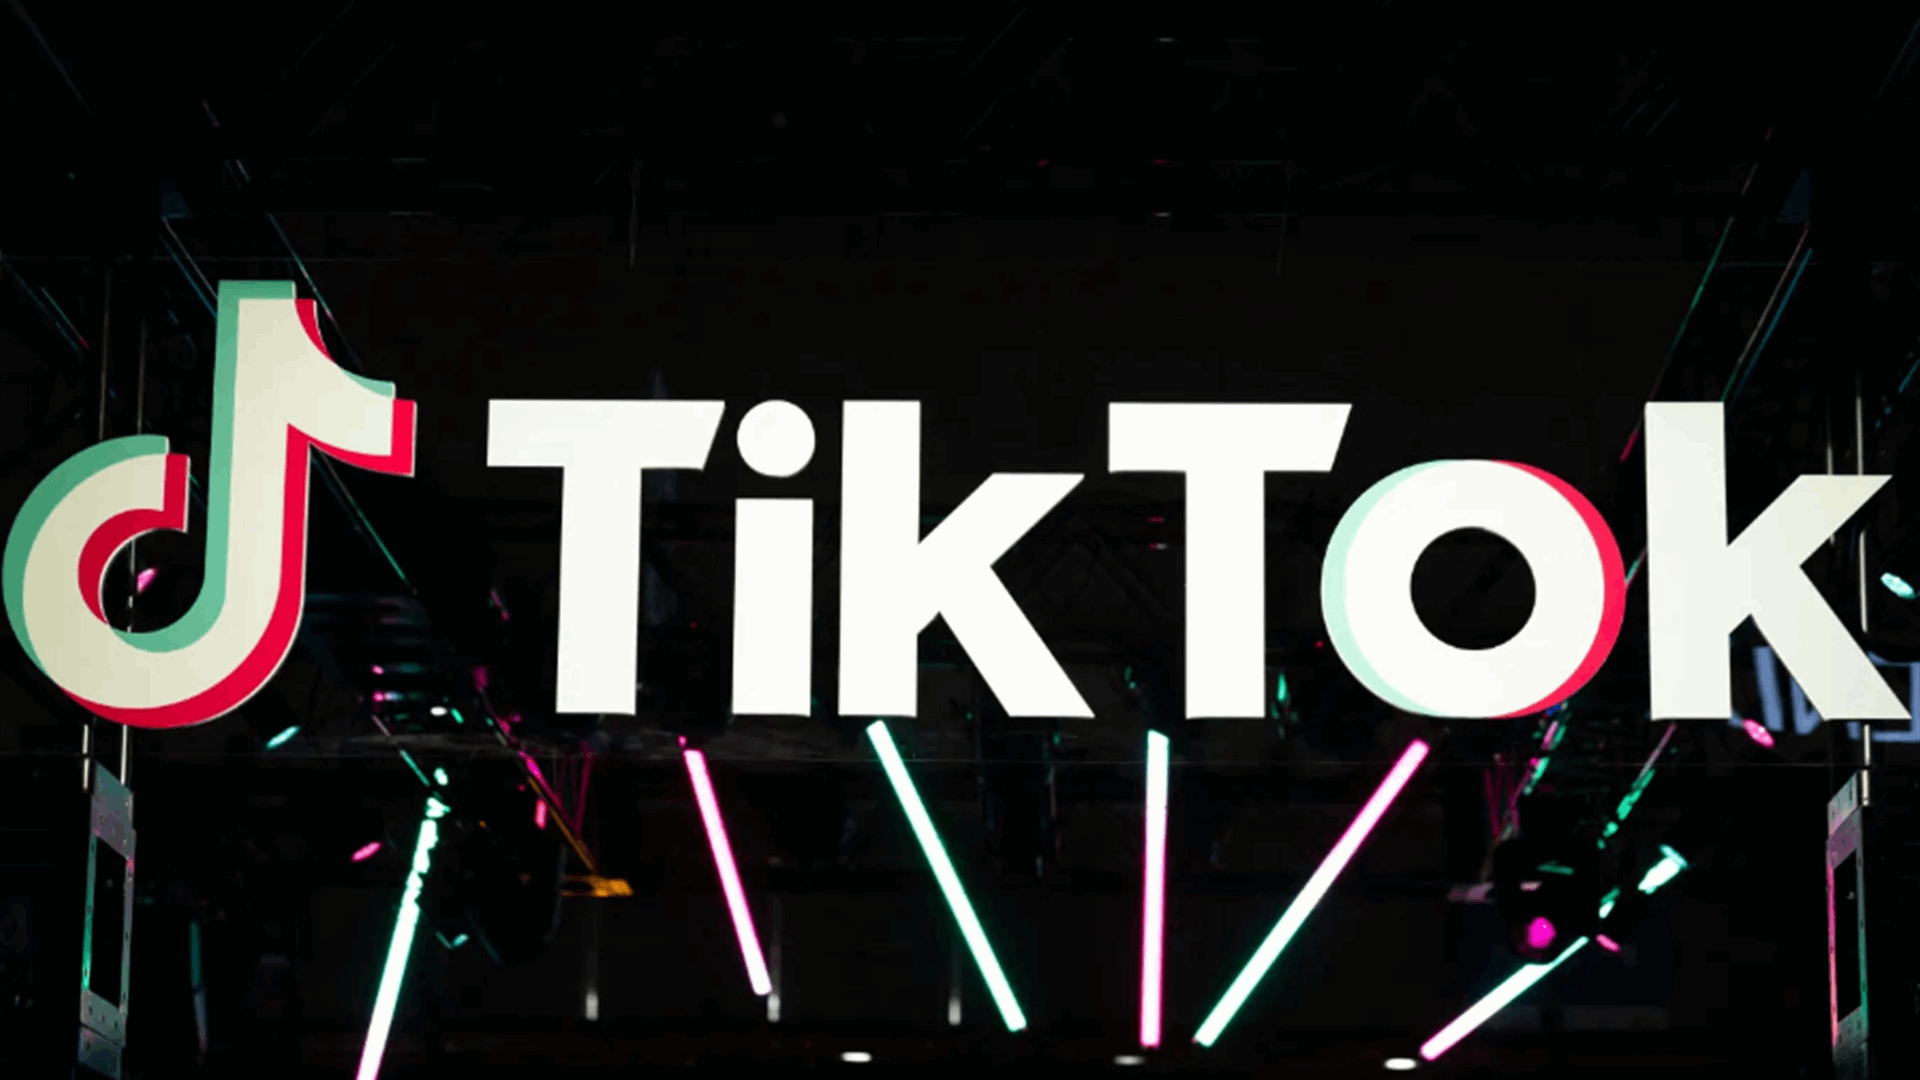 TikTok sues Montana over its controversial new law banning the app